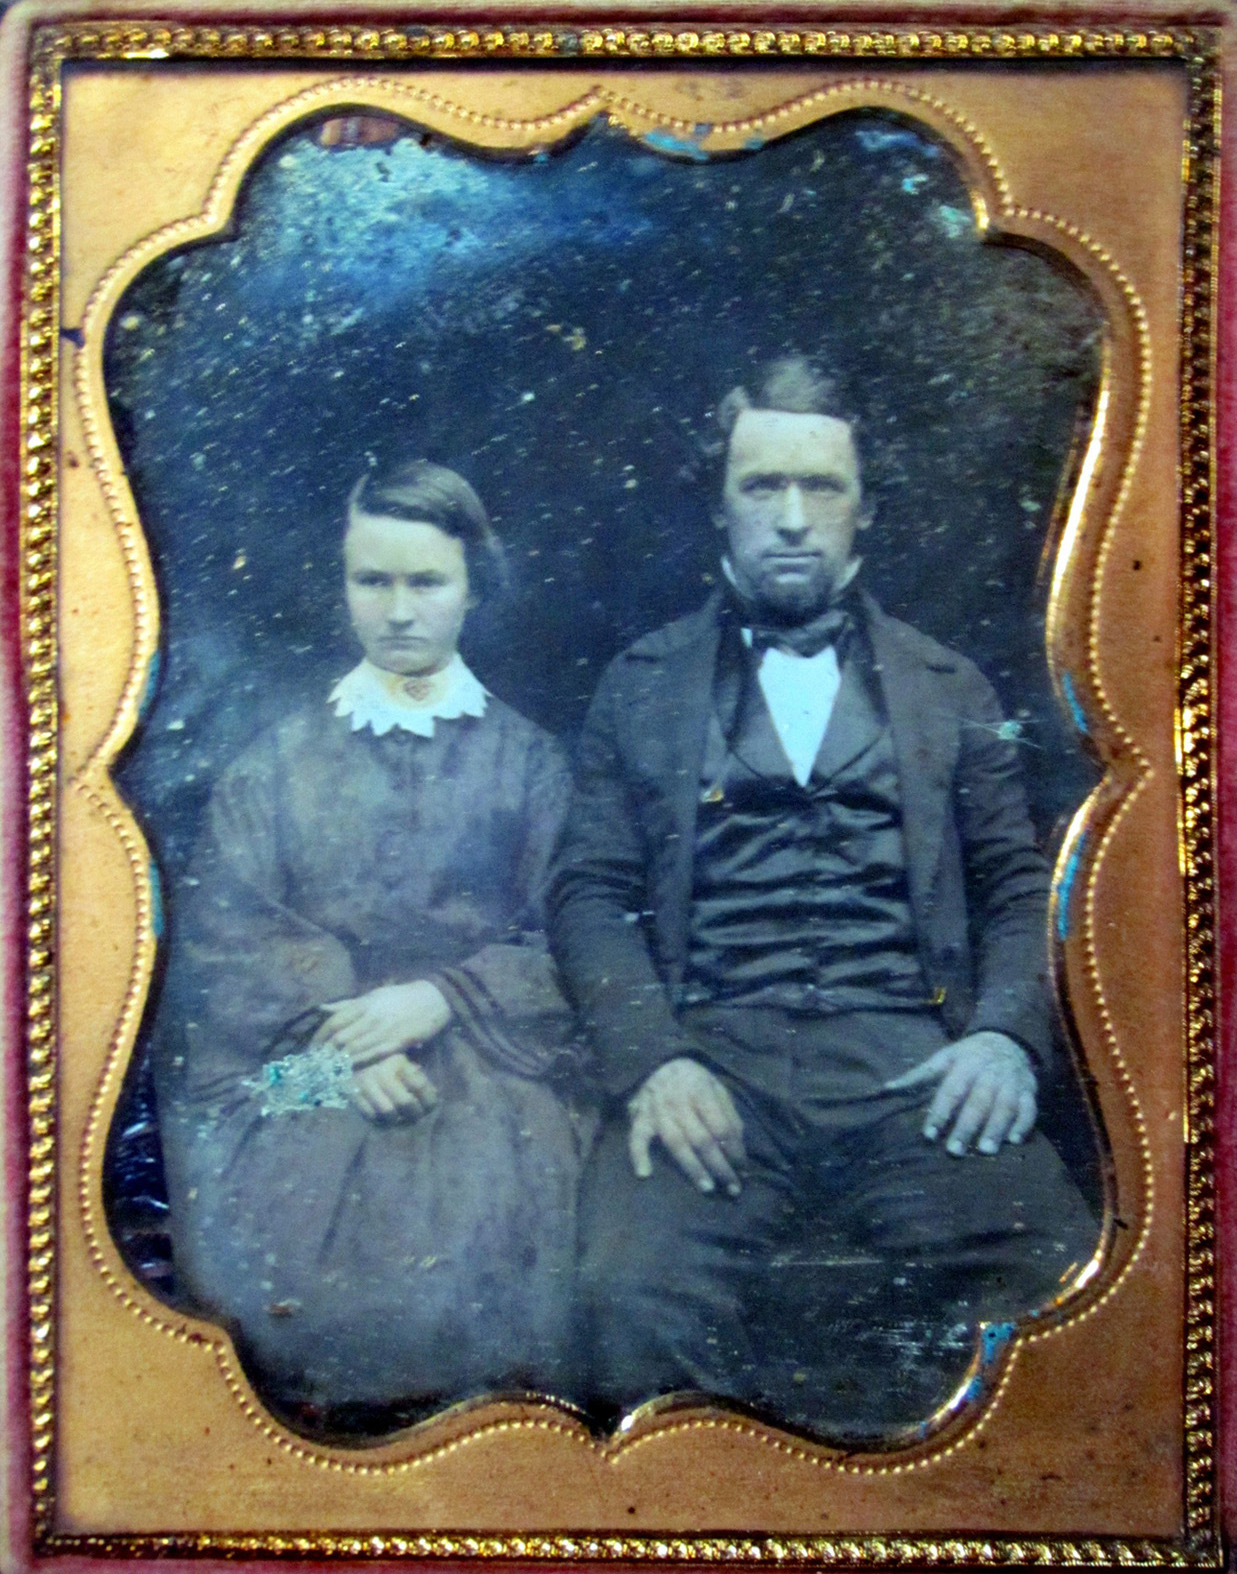 This is my first post to Shorpy, so I may as well start with the oldest of the photos I have inherited from my grandparents. This is a daguerreotype of my great-great-grandparents, Maria R. Vaughan and Martin Van Buren Jones on their wedding day in Marion County, Oregon, Oct. 29, 1854. They met and fell in love while crossing on the Oregon Trail in 1852 when he was 21 and she was 14. He was traveling alone, while she was with her parents and siblings, who settled SW of the Portland area. He went down the coast to just south of the California/Oregon border, where he settled and became one of the founders of Crescent City, California. Once settled, he went back north, married her, and brought her back to Crescent City, making her the first bride there. They went on to raise a large family. He was born in New York state in 1831 and died on his timber claim near Klamath, Del Norte County, California, on March 31, 1884. She was born in Peoria, Illinois,  Dec. 14, 1837, and died in Crescent City on June 6, 1926. I grew up in her old house. View full size.